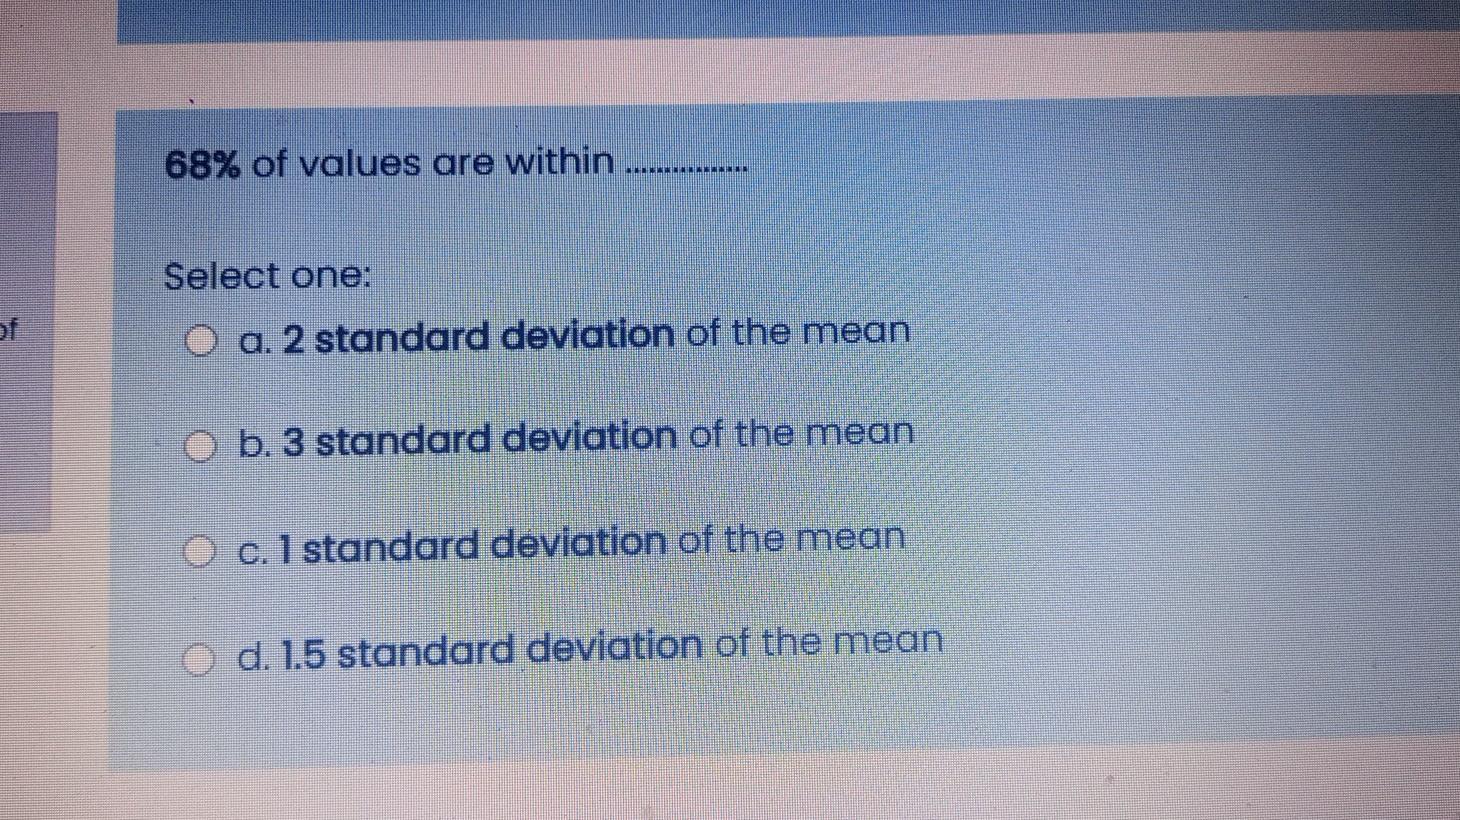 68 Of Values Are Within Anner Select One Of O A 2 Standard Deviation Of The Mean O B 3 Standard Deviation Of The Mea 1